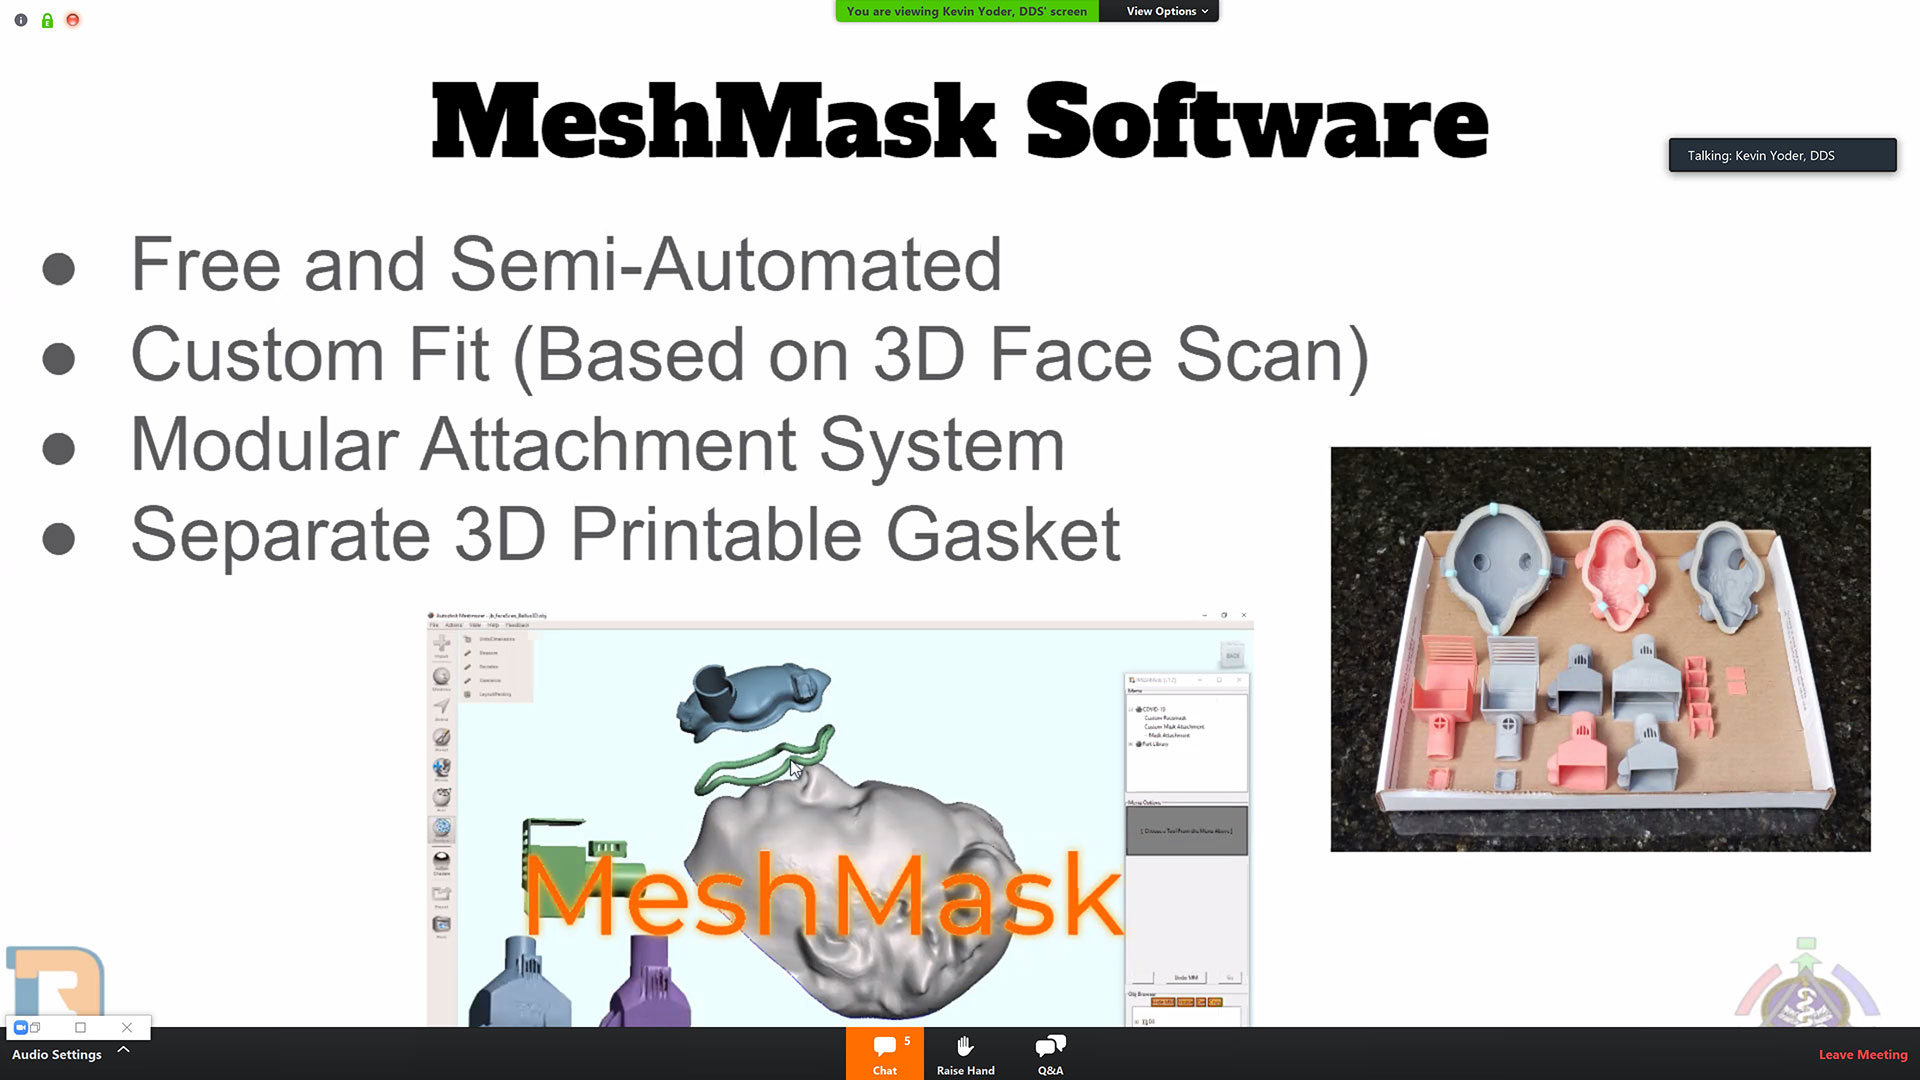 Dr. Kevin Yoder, DDS created the MeshMask software, free of charge and available at d3Tool.com.